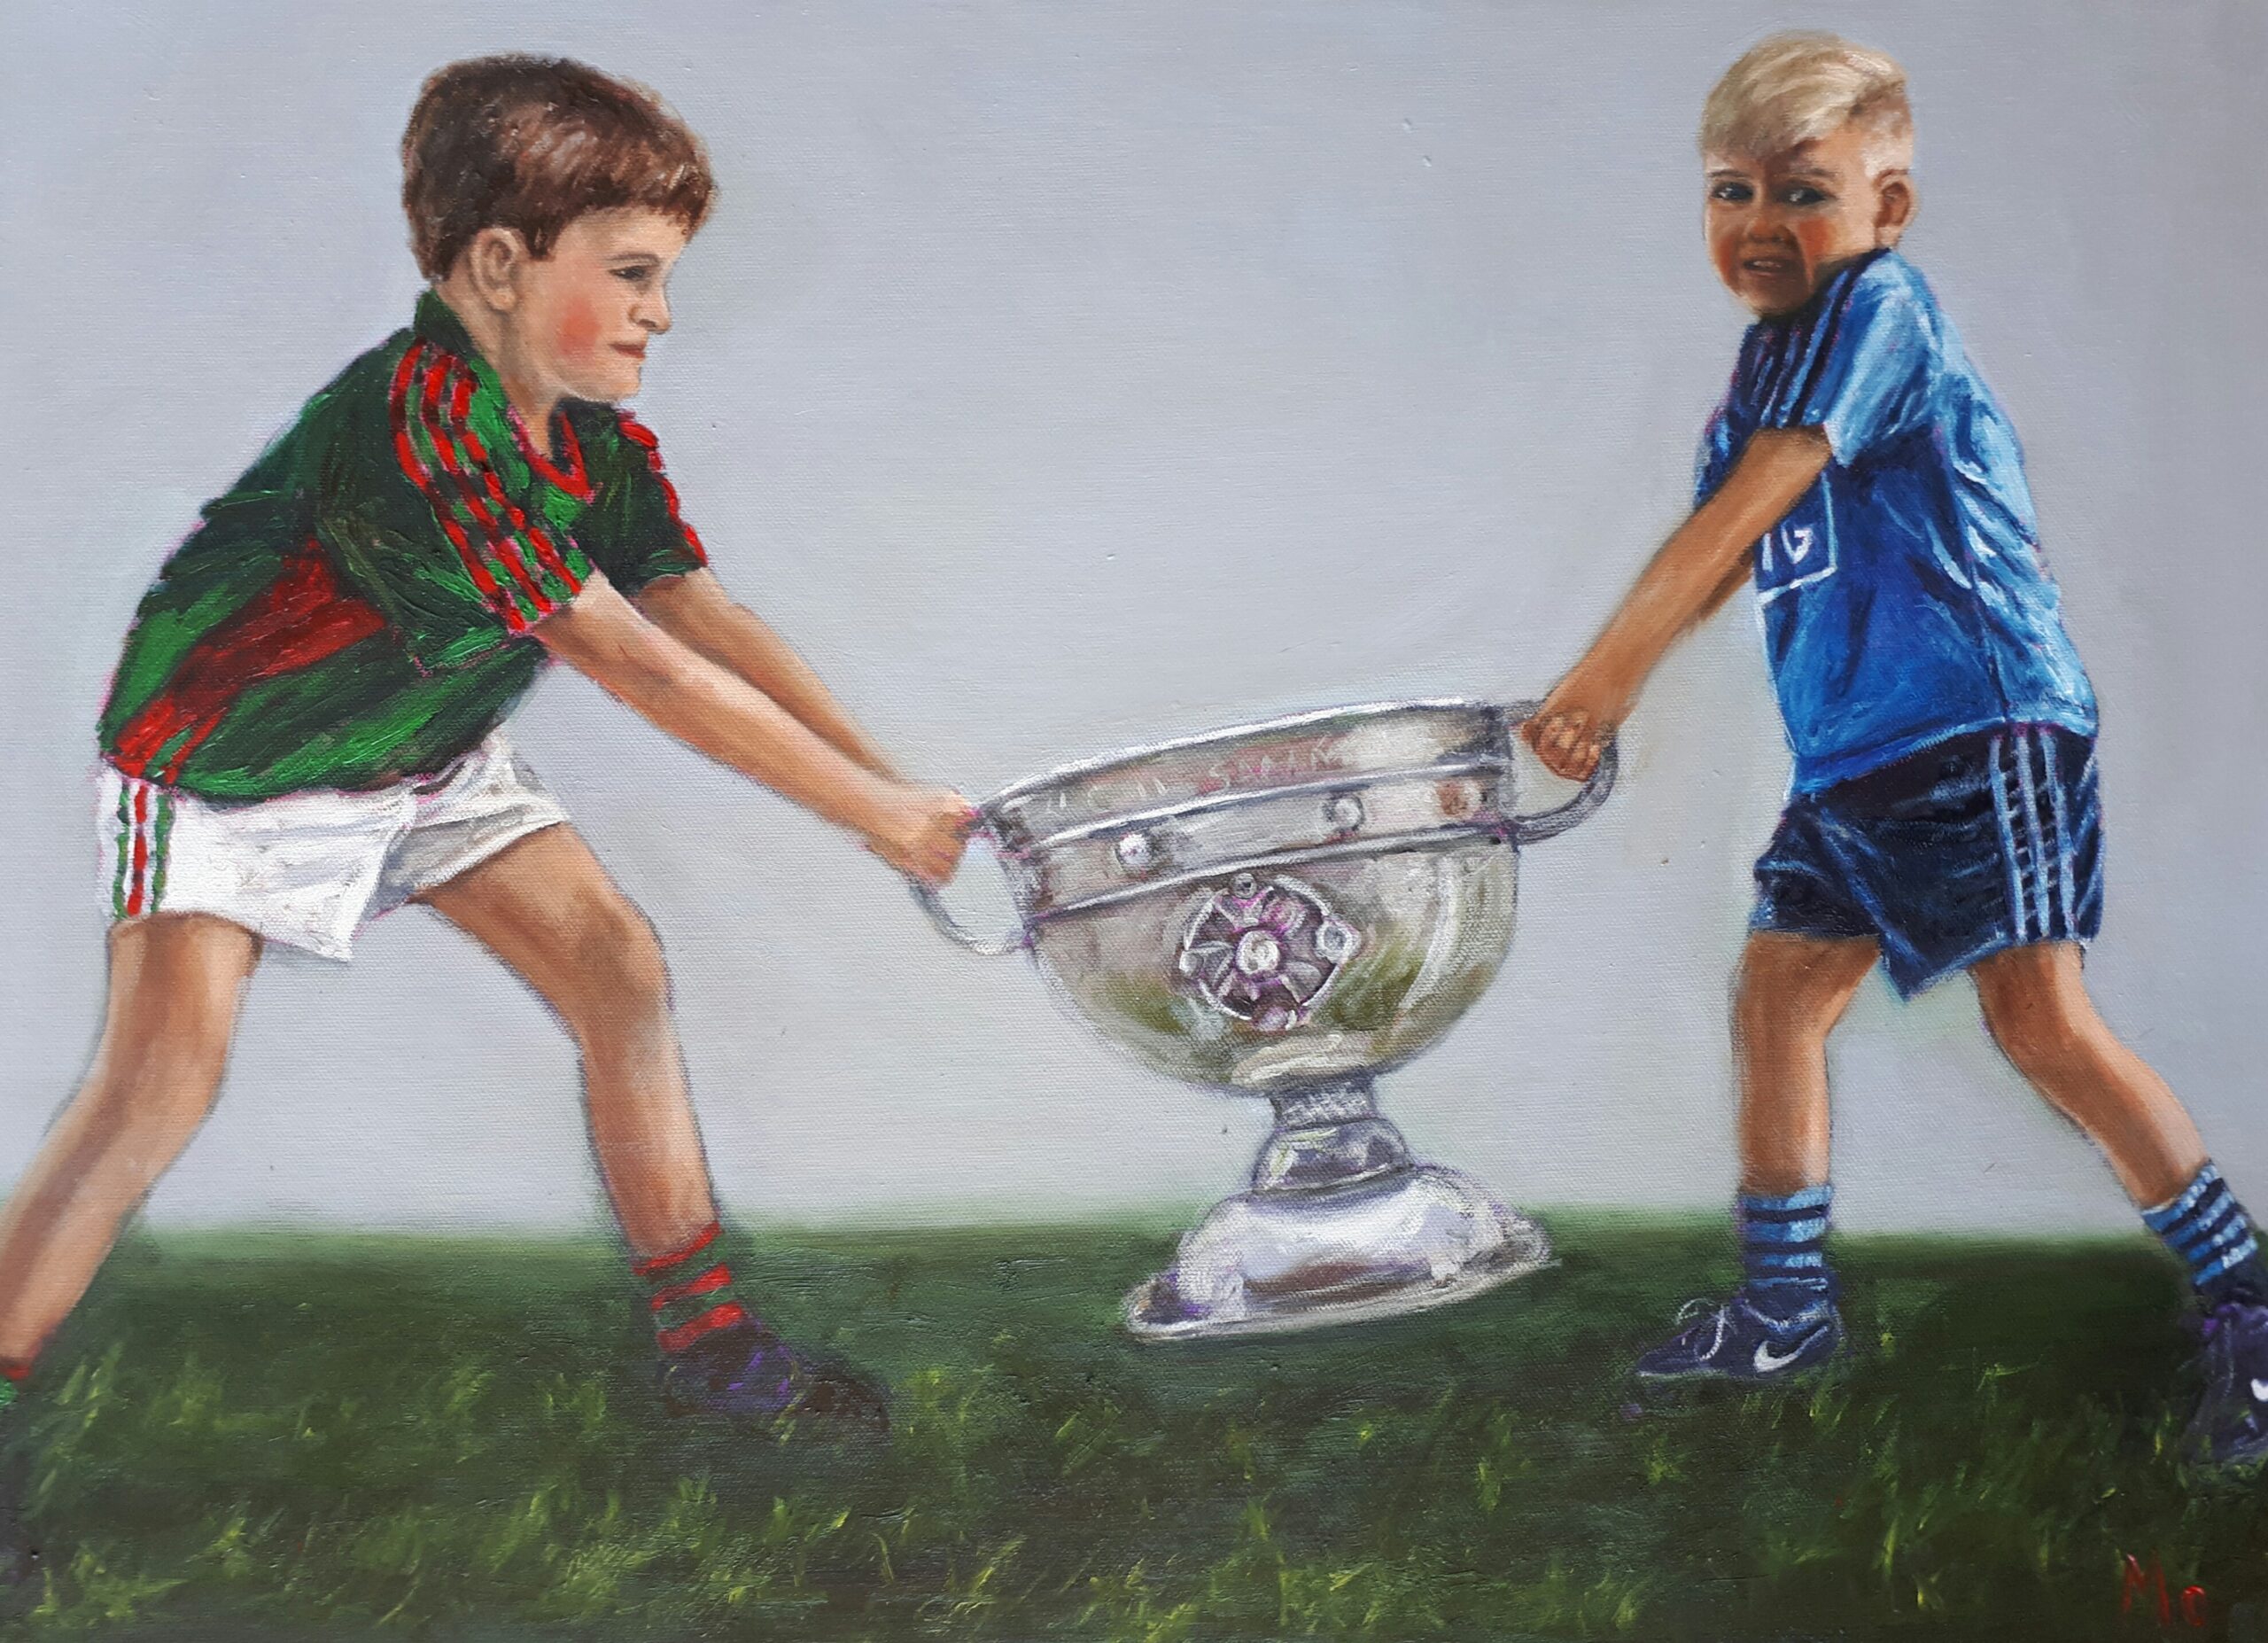 Dublin and Mayo boys fighting over the Sam Maguire